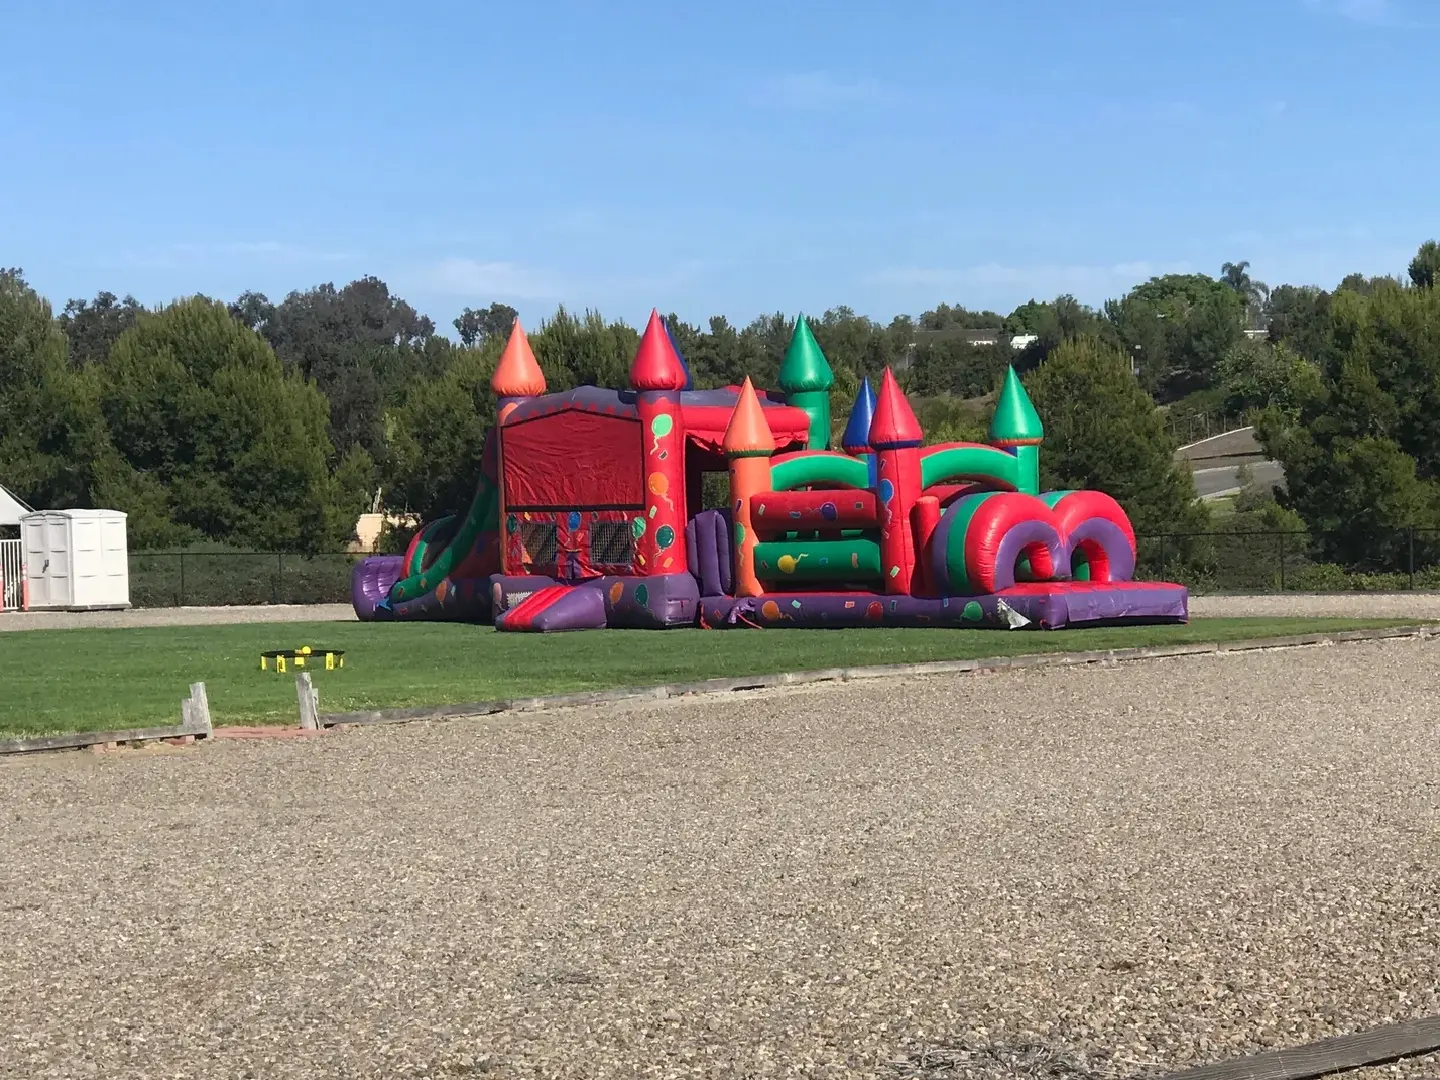 A large inflatable castle with many colors.